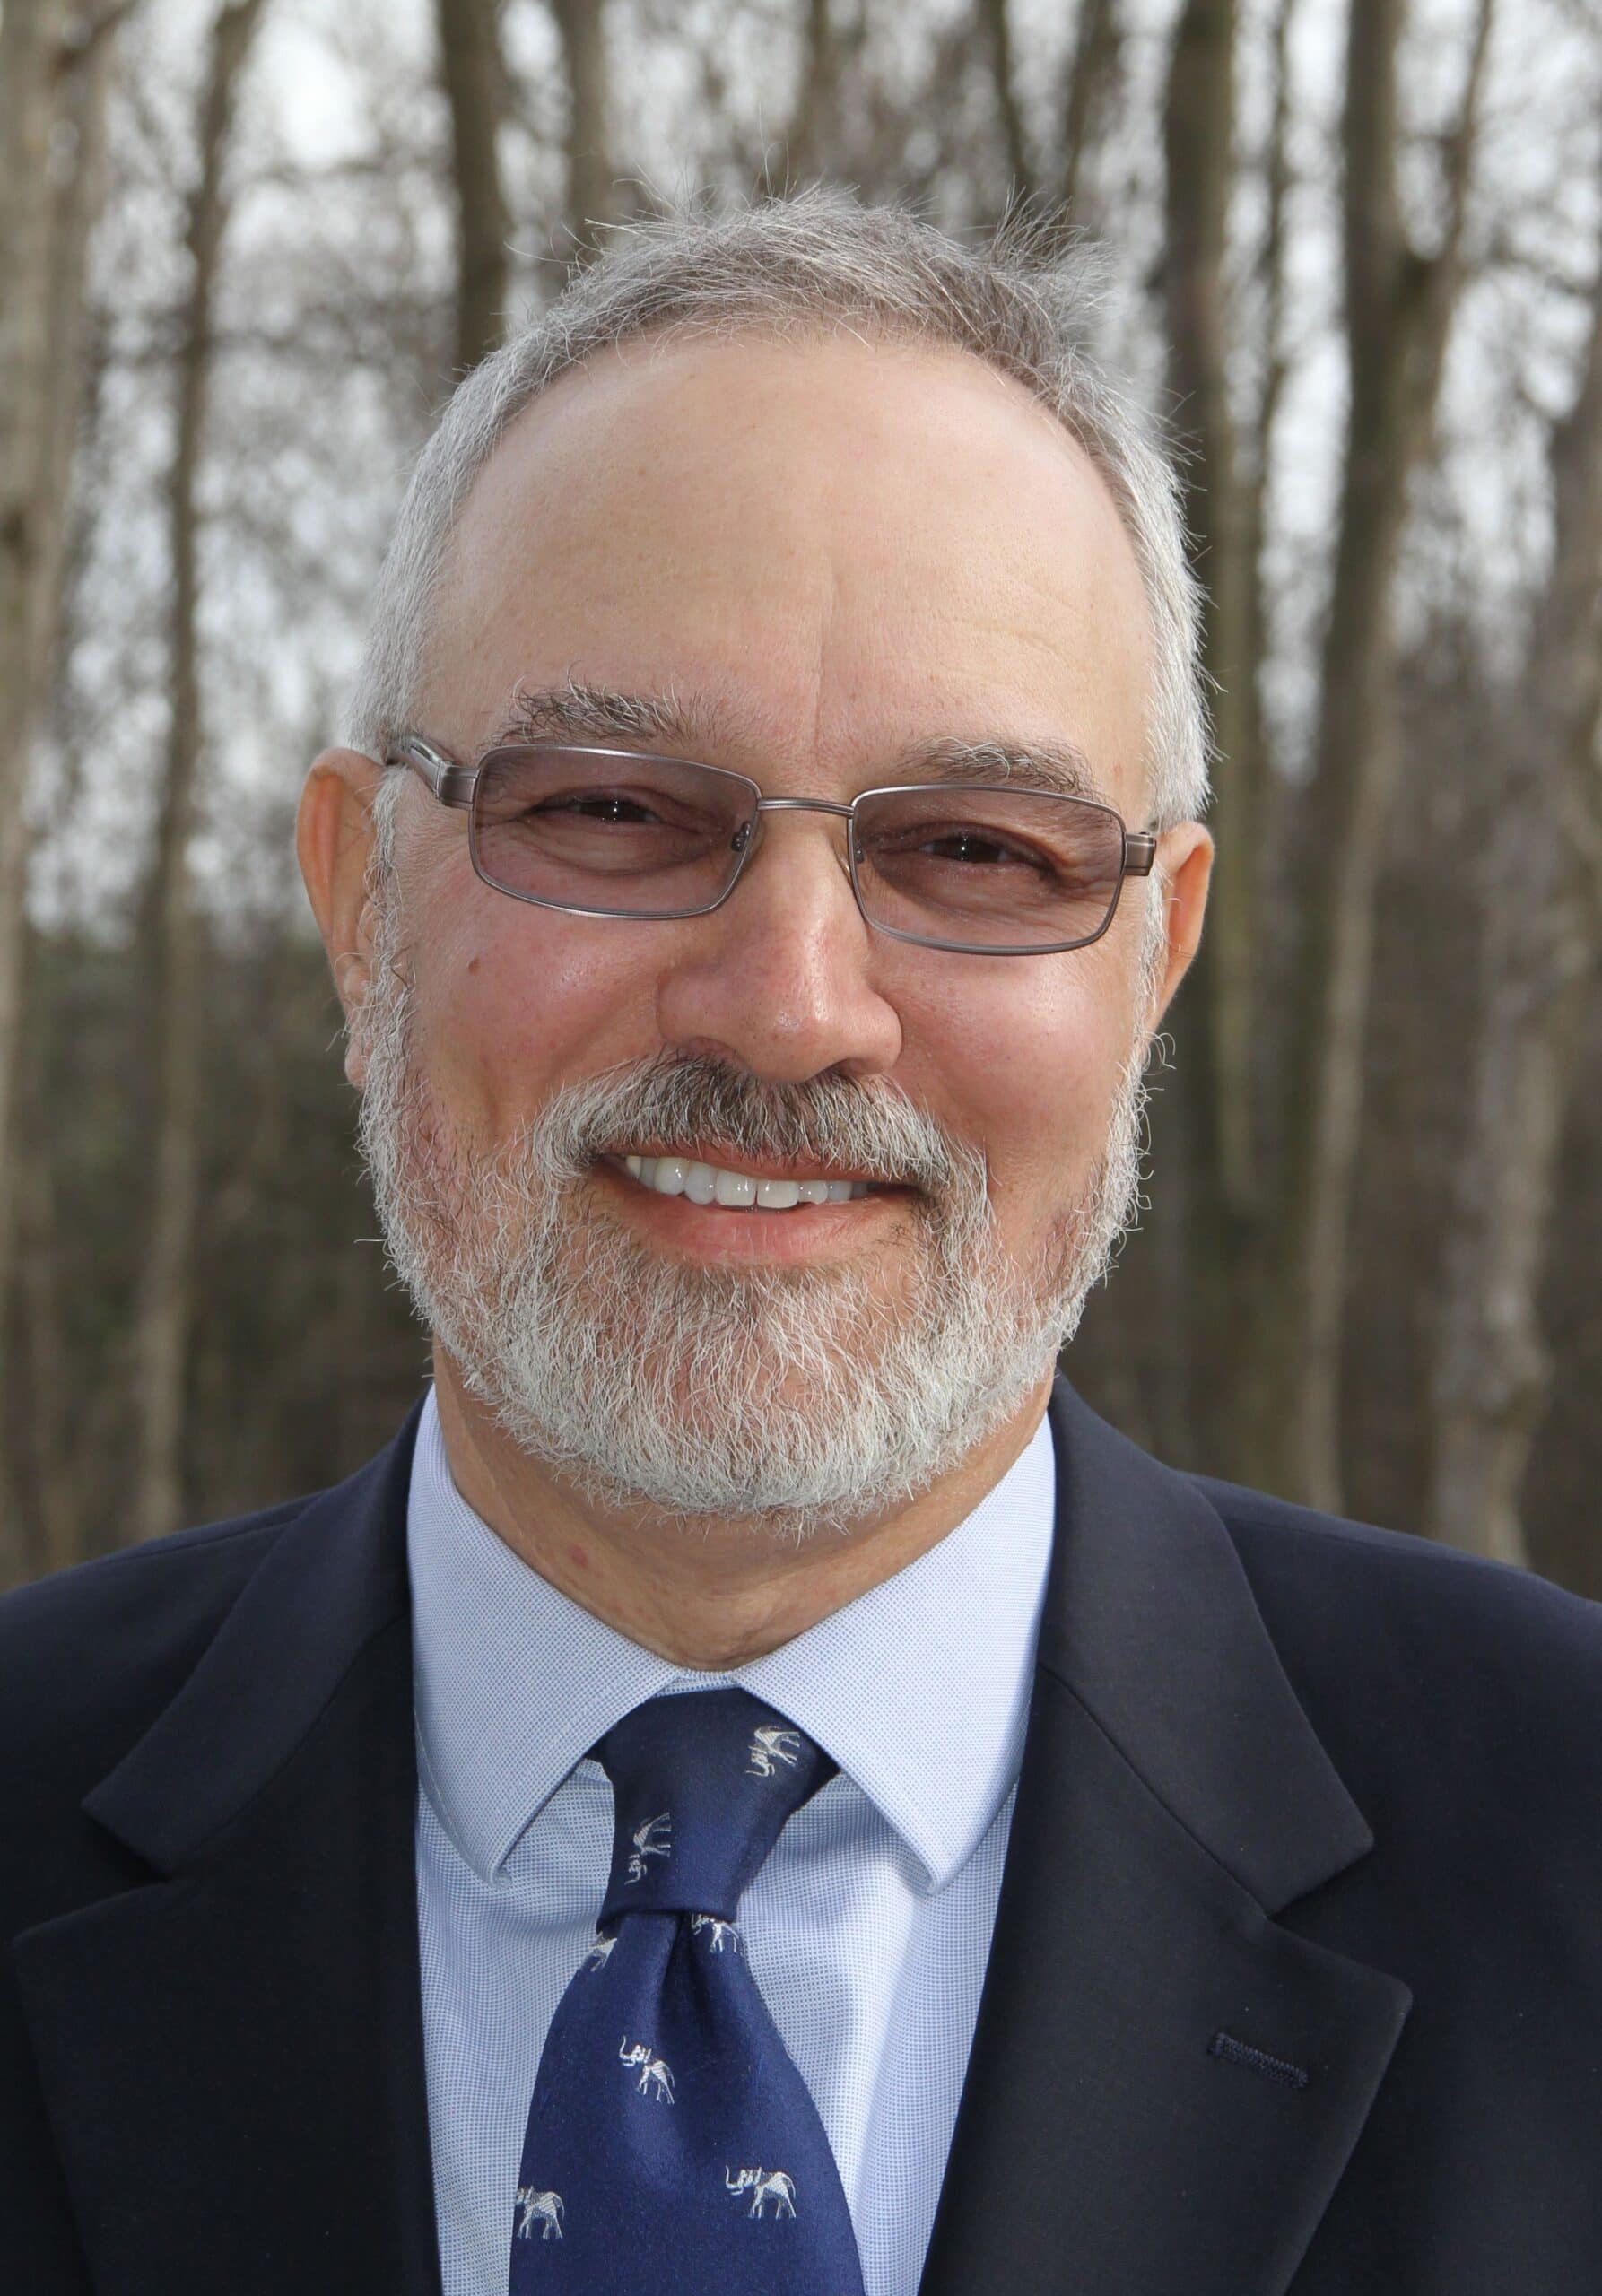 Man in a suite and tie, smiles at the camera with trees in the background.